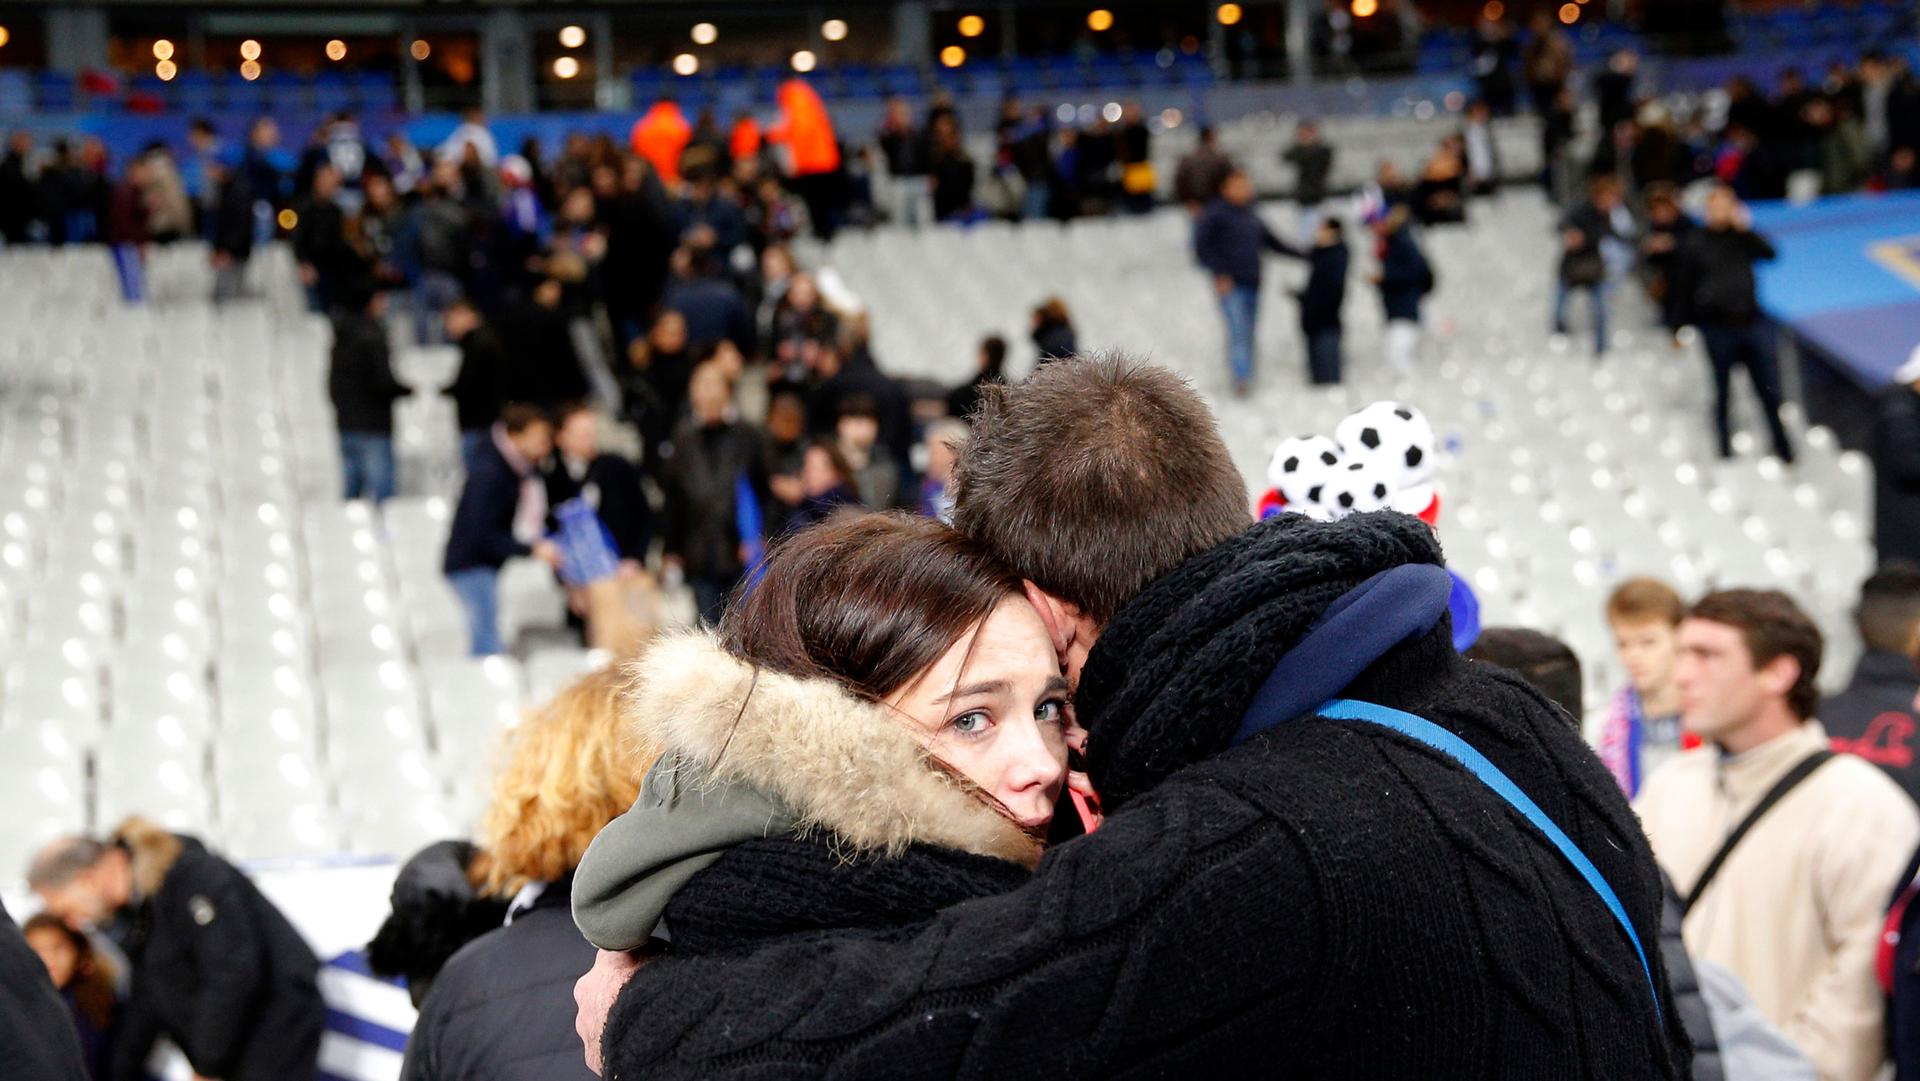 A man is shown hugging a woman who is looking into the camera with empty stadium seats in the distance.